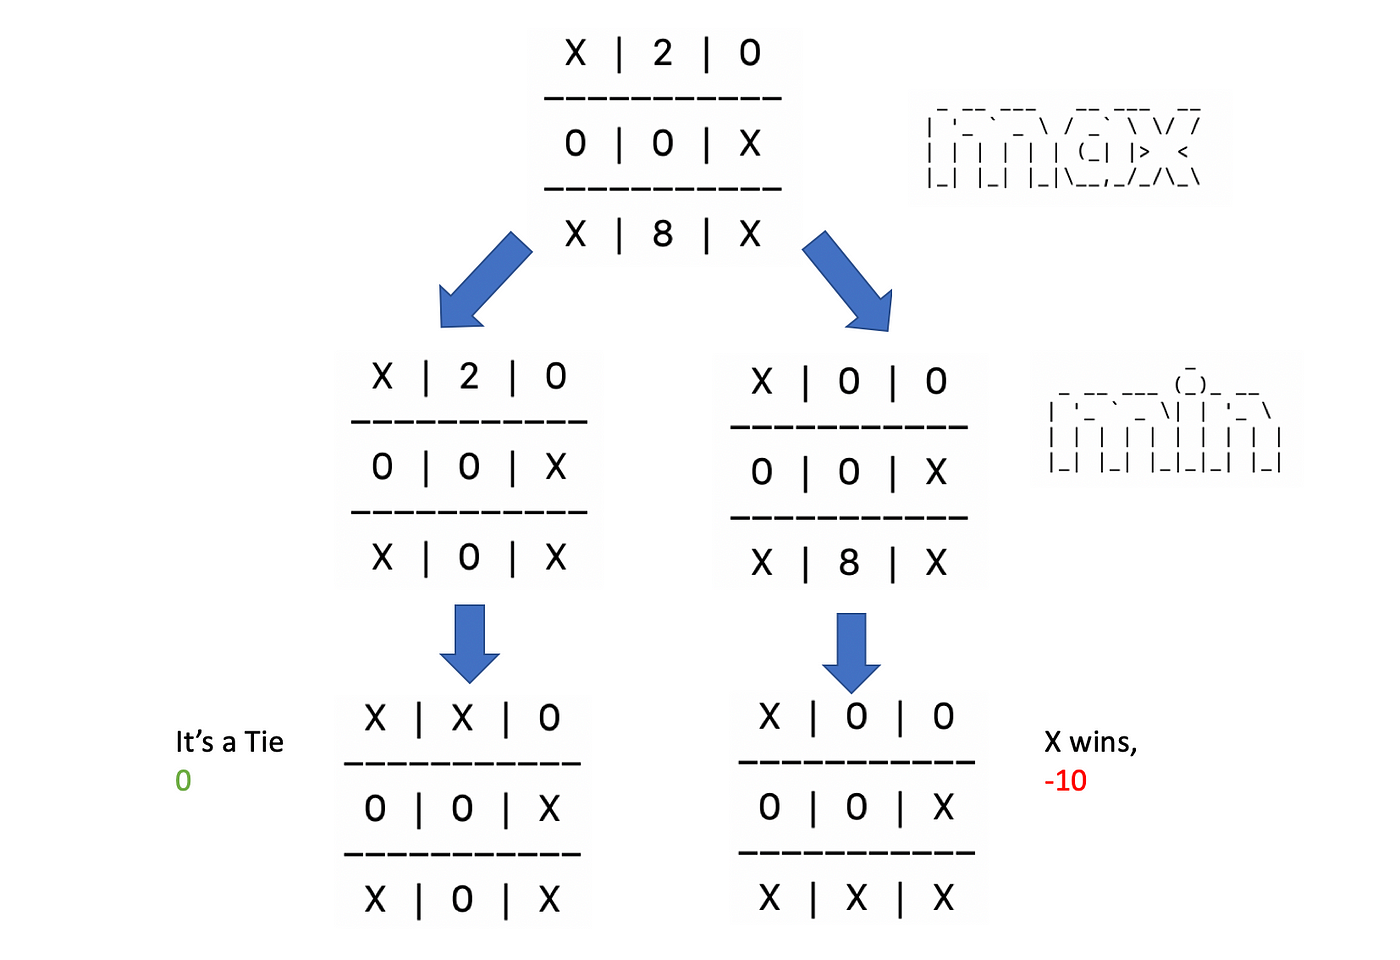 GitHub - conorhennessy/Tic-Tac-Toe-AI: A Tic Tac Toe Game (5x5 board size)  with an AI opponent to play against. Using minimax algorithm.